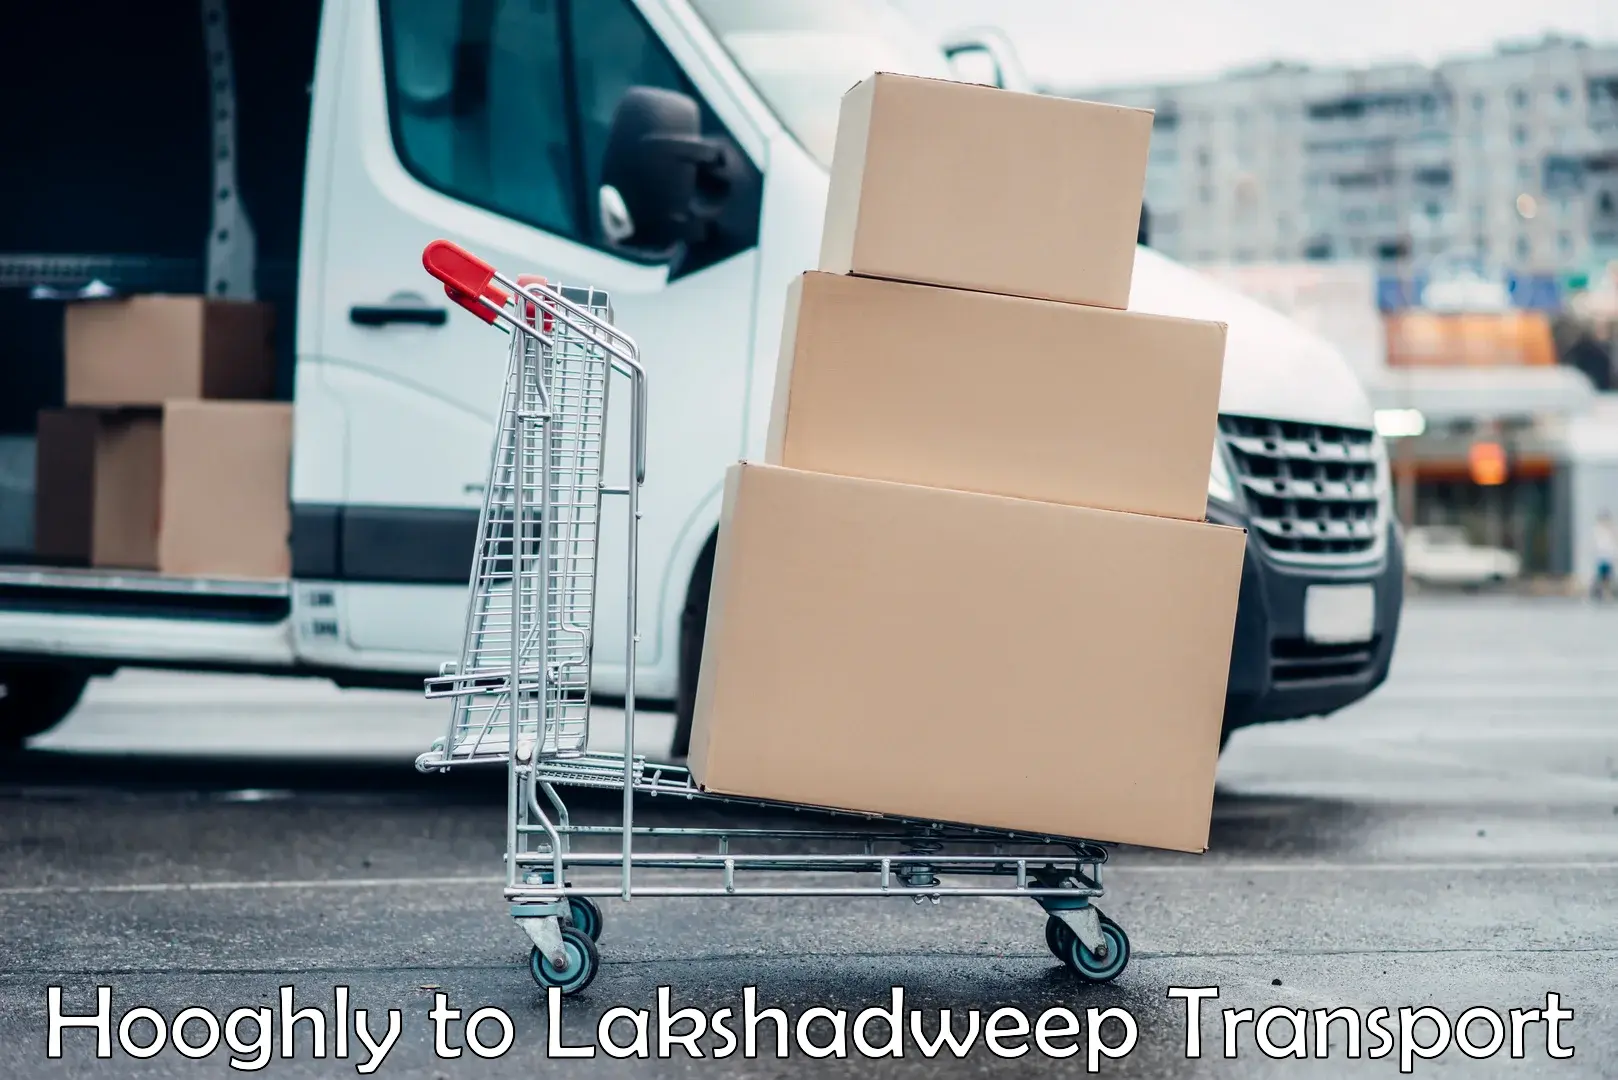 Road transport online services Hooghly to Lakshadweep